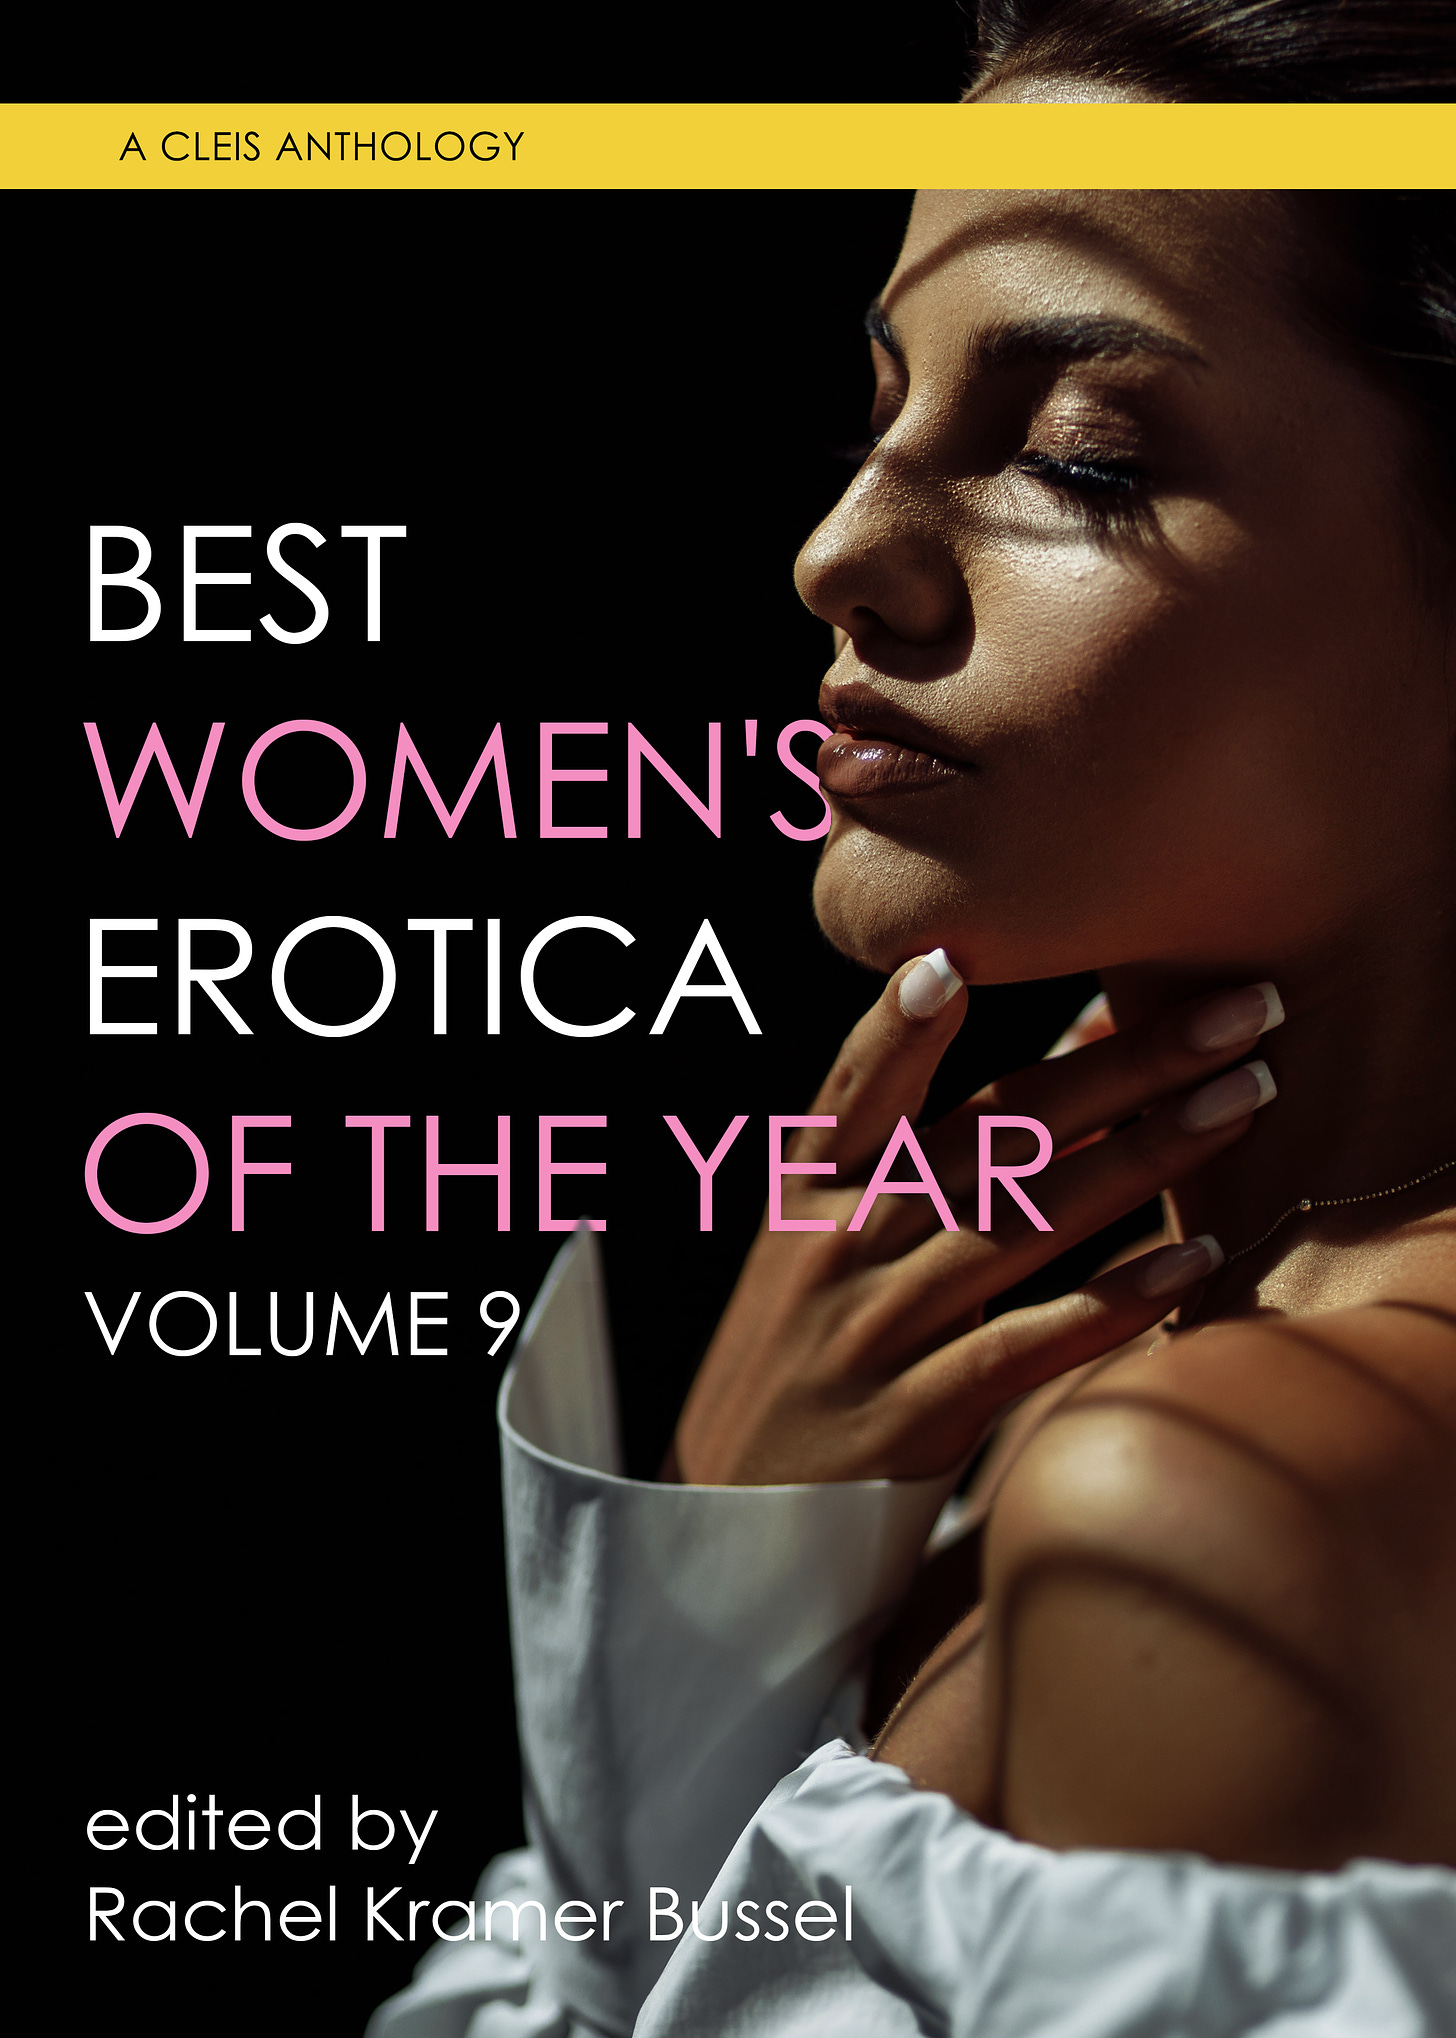 cover of Best Women's Erotica of the Year, Volume 9 edited by Rachel Kramer Bussel, showing woman's face in sensual pose